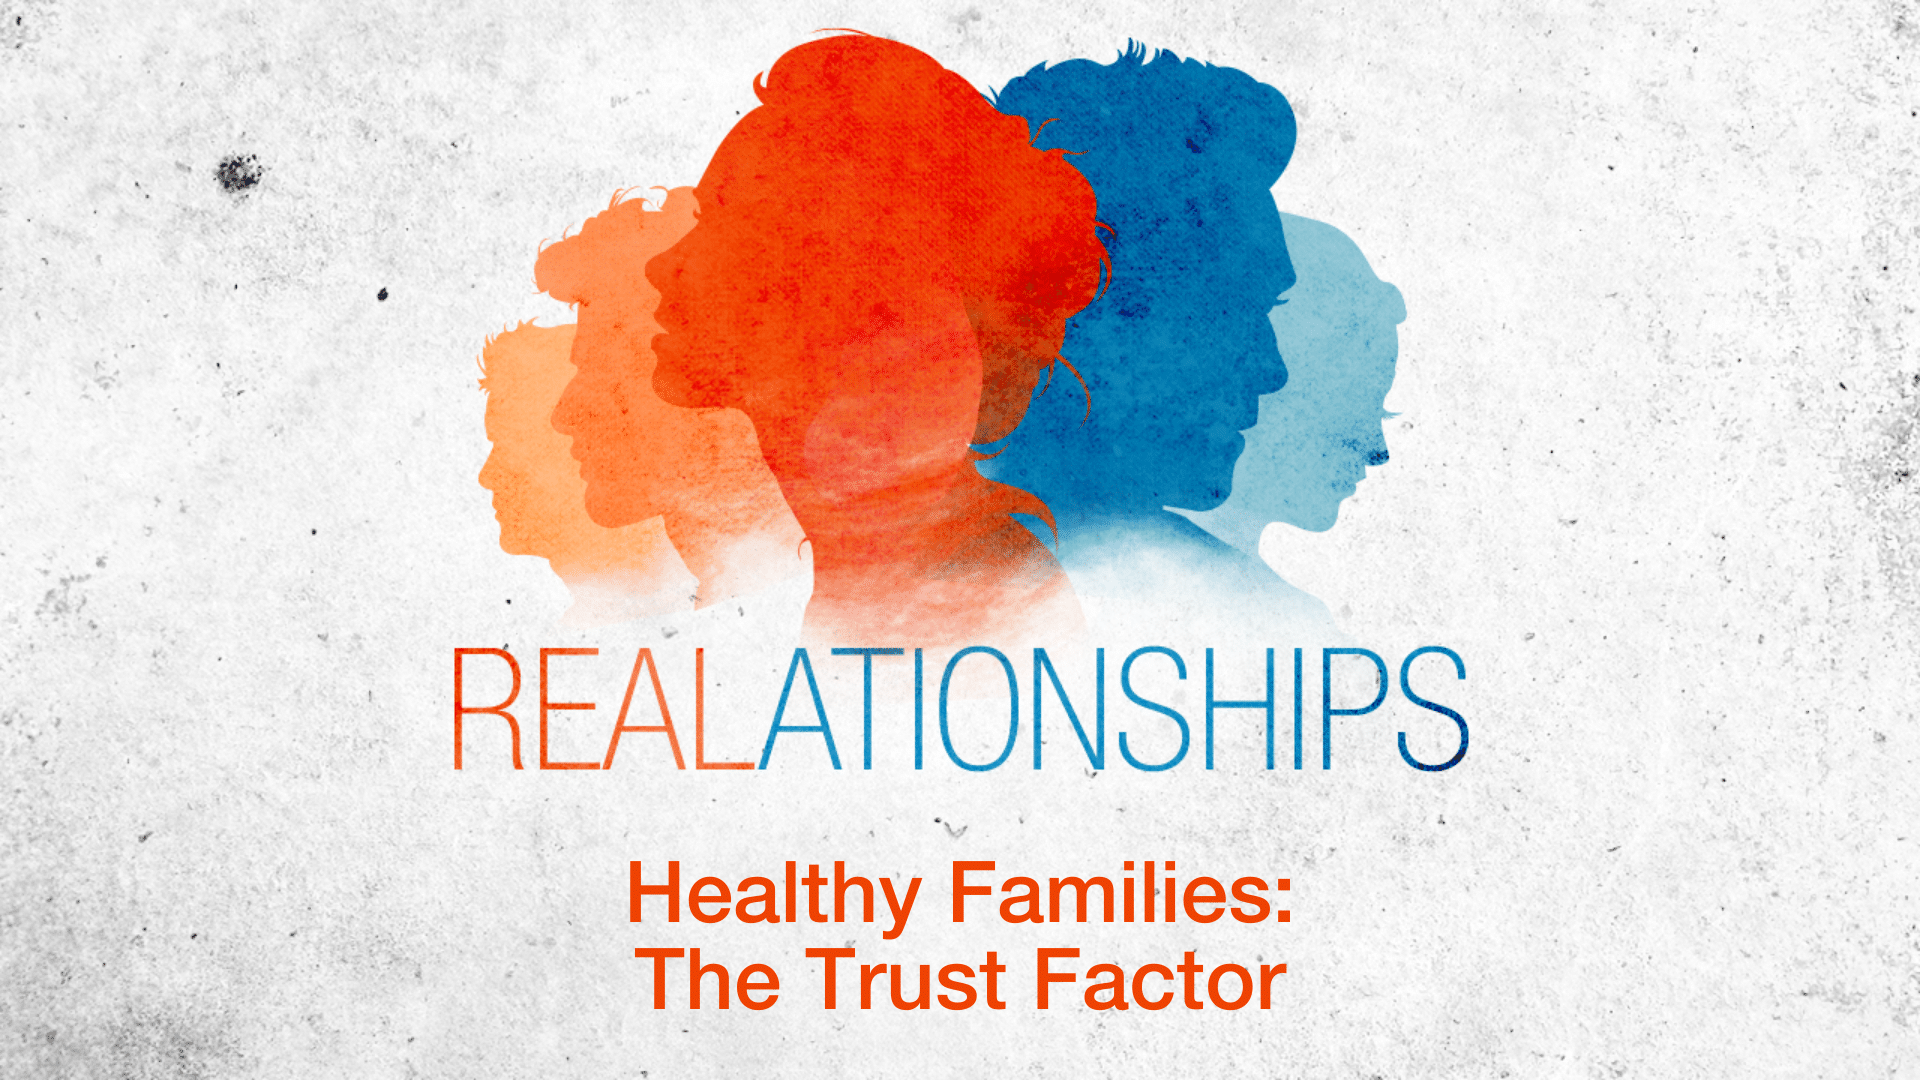 REALationships: Healthy Families, The Trust Factor